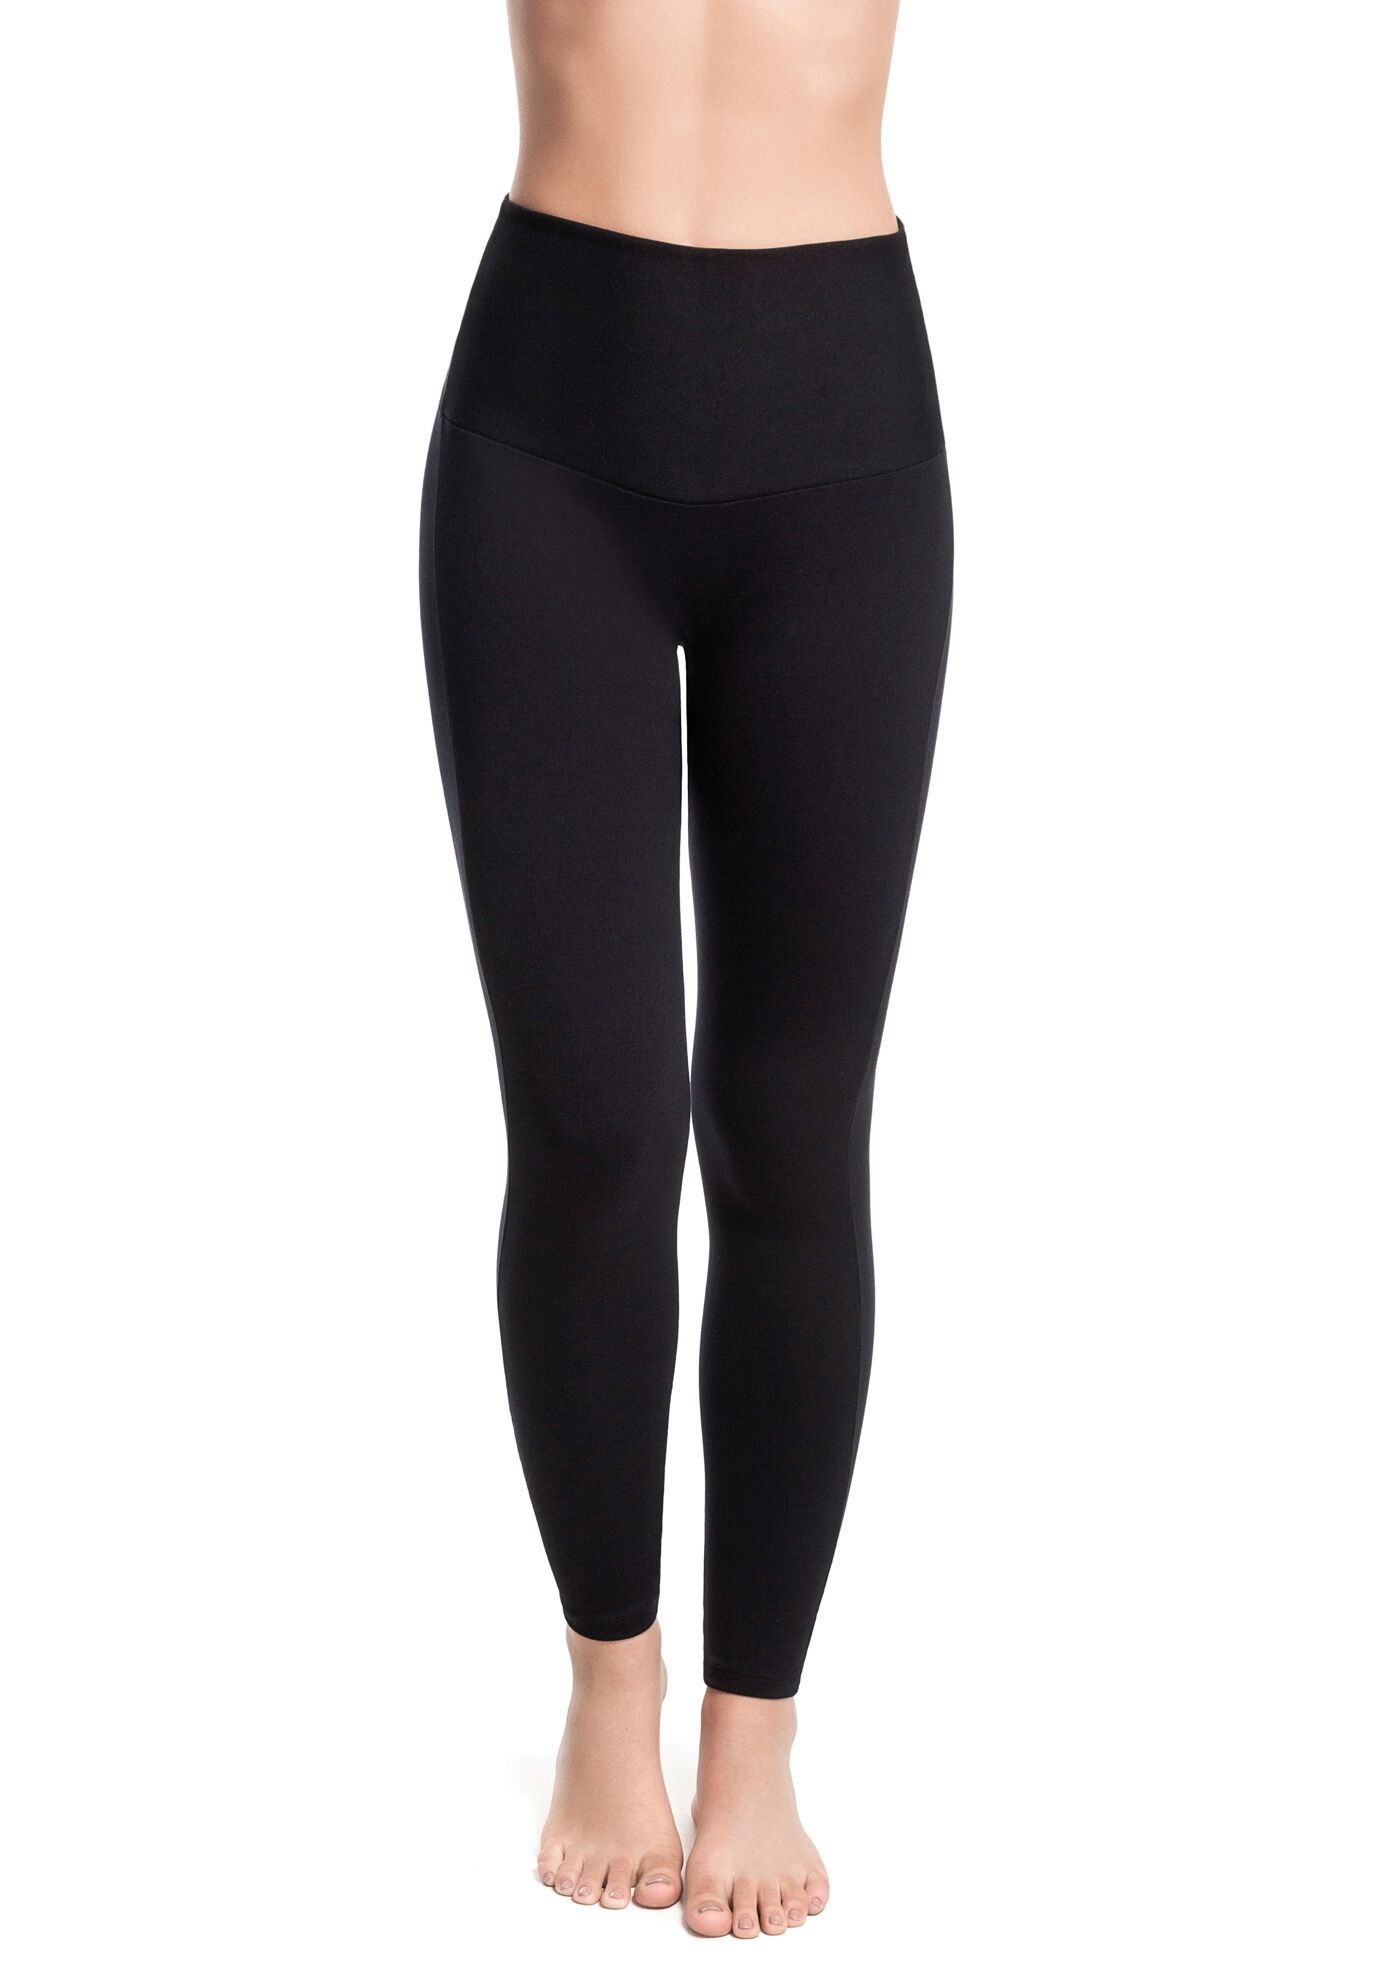 Plus Size Women's Bossa Essence High Rise Legging by Squeem in Black (Size 2X)